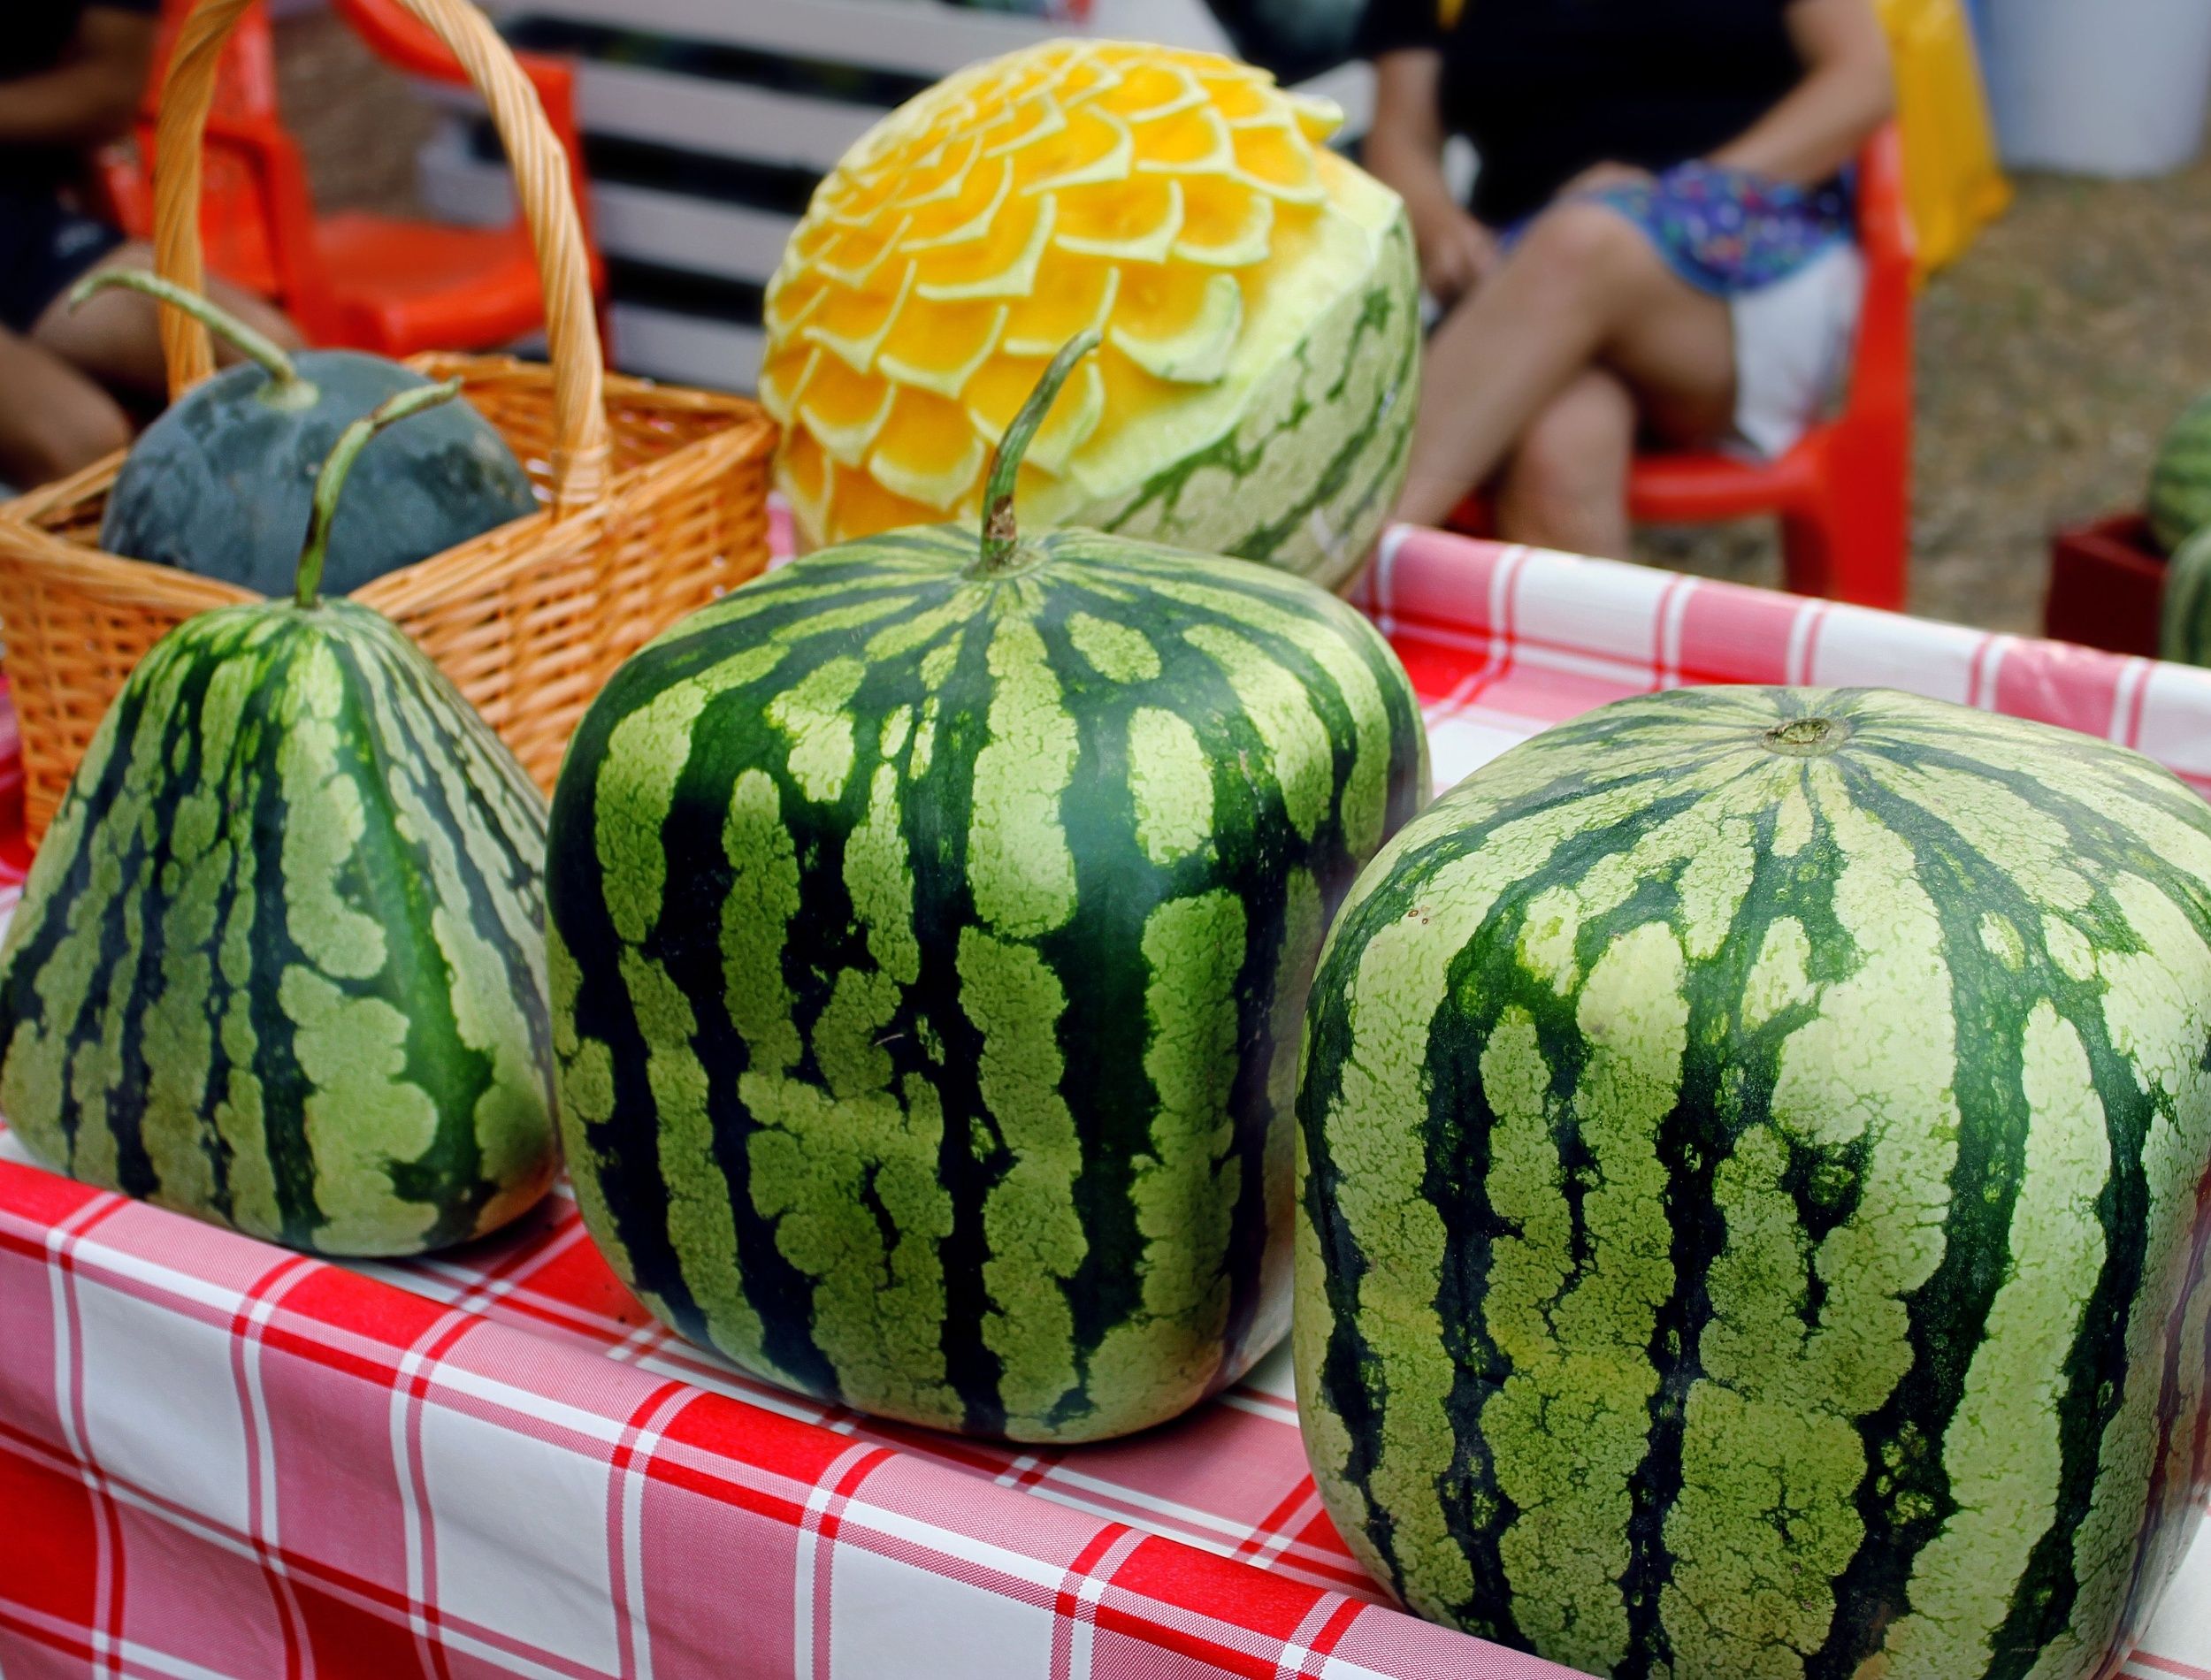 square watermelons at the market 